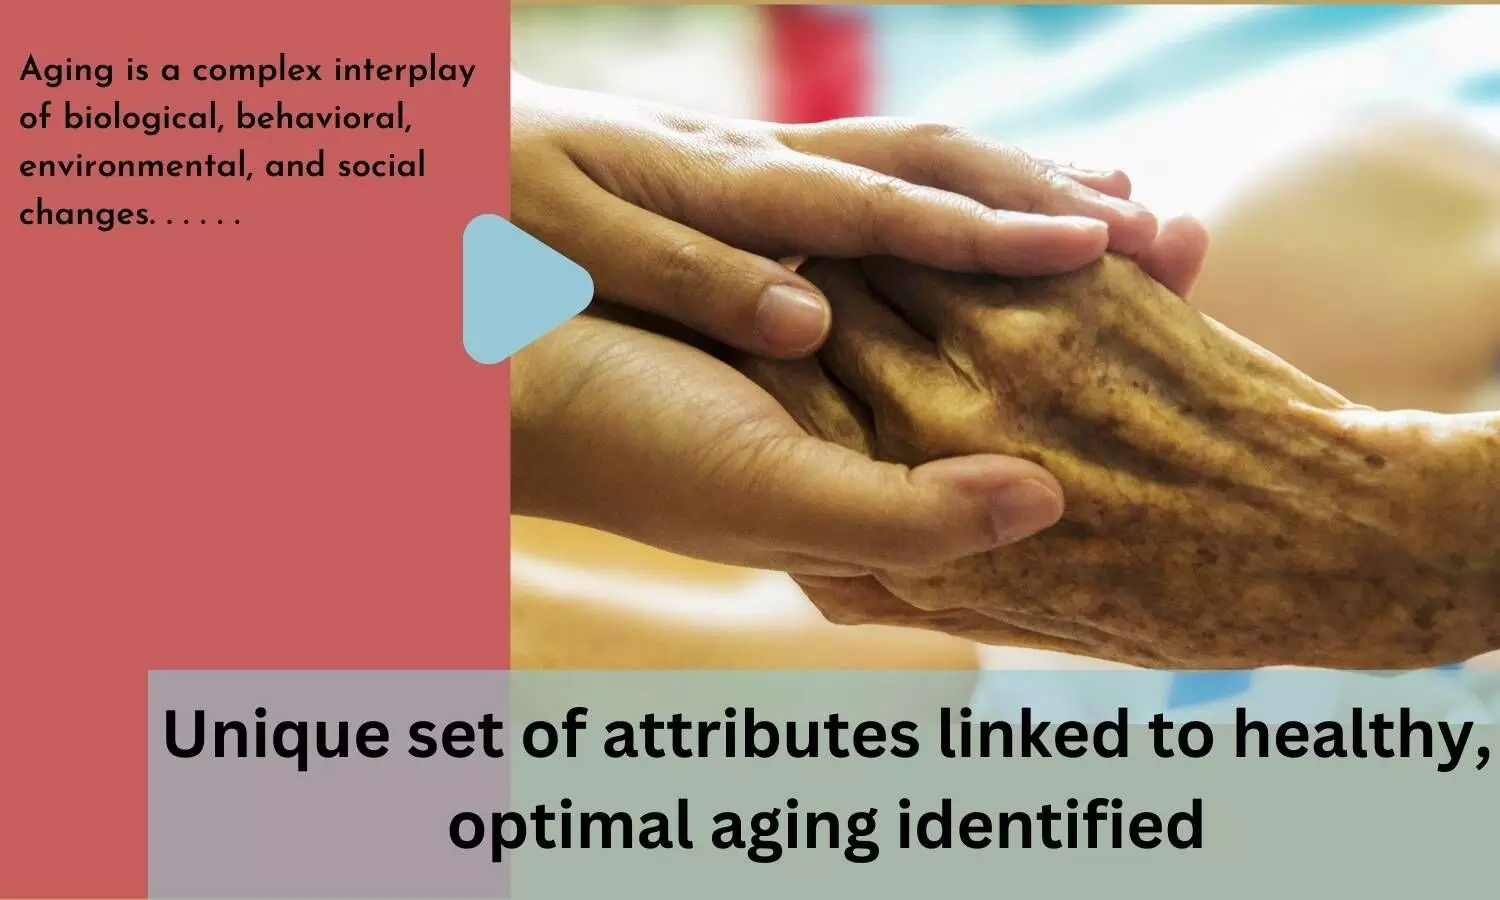 Unique set of attributes linked to healthy, optimal aging identified